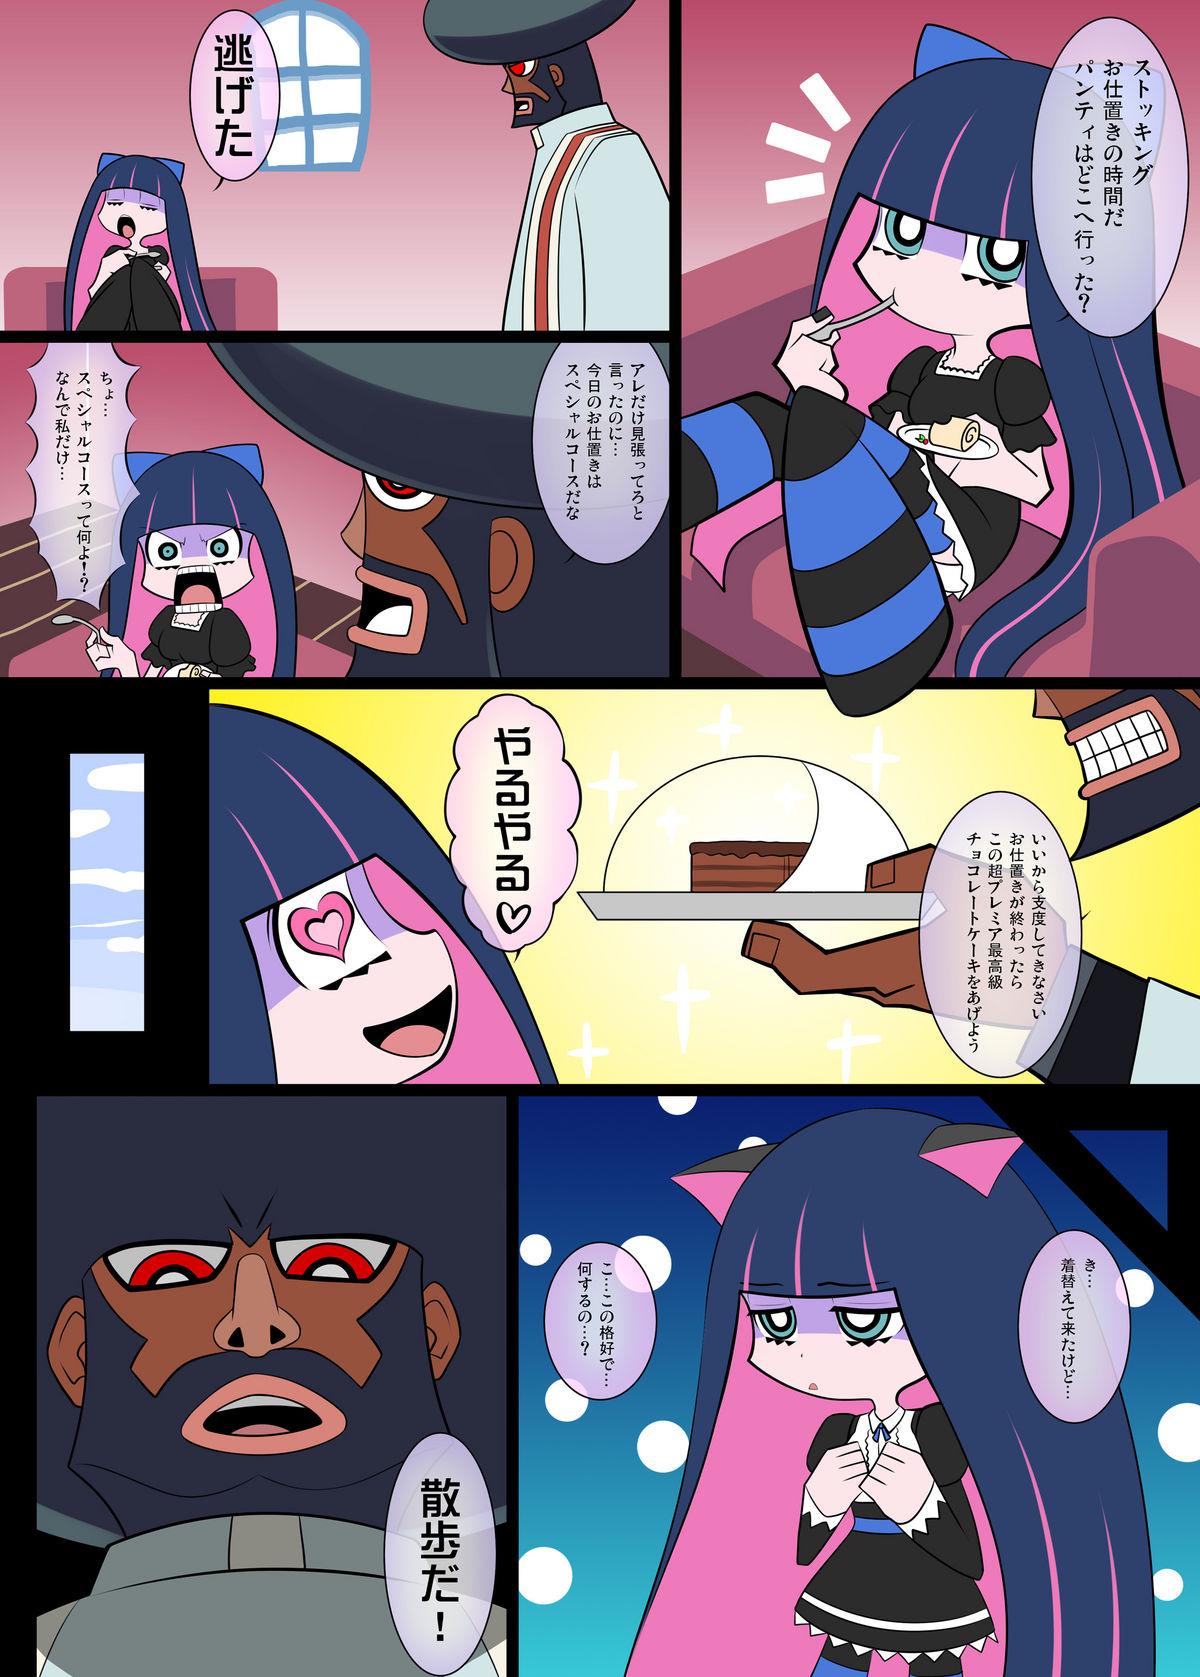 Real Amateur Porn Sperma & Sweets with Villager - Panty and stocking with garterbelt Gay Uniform - Page 3